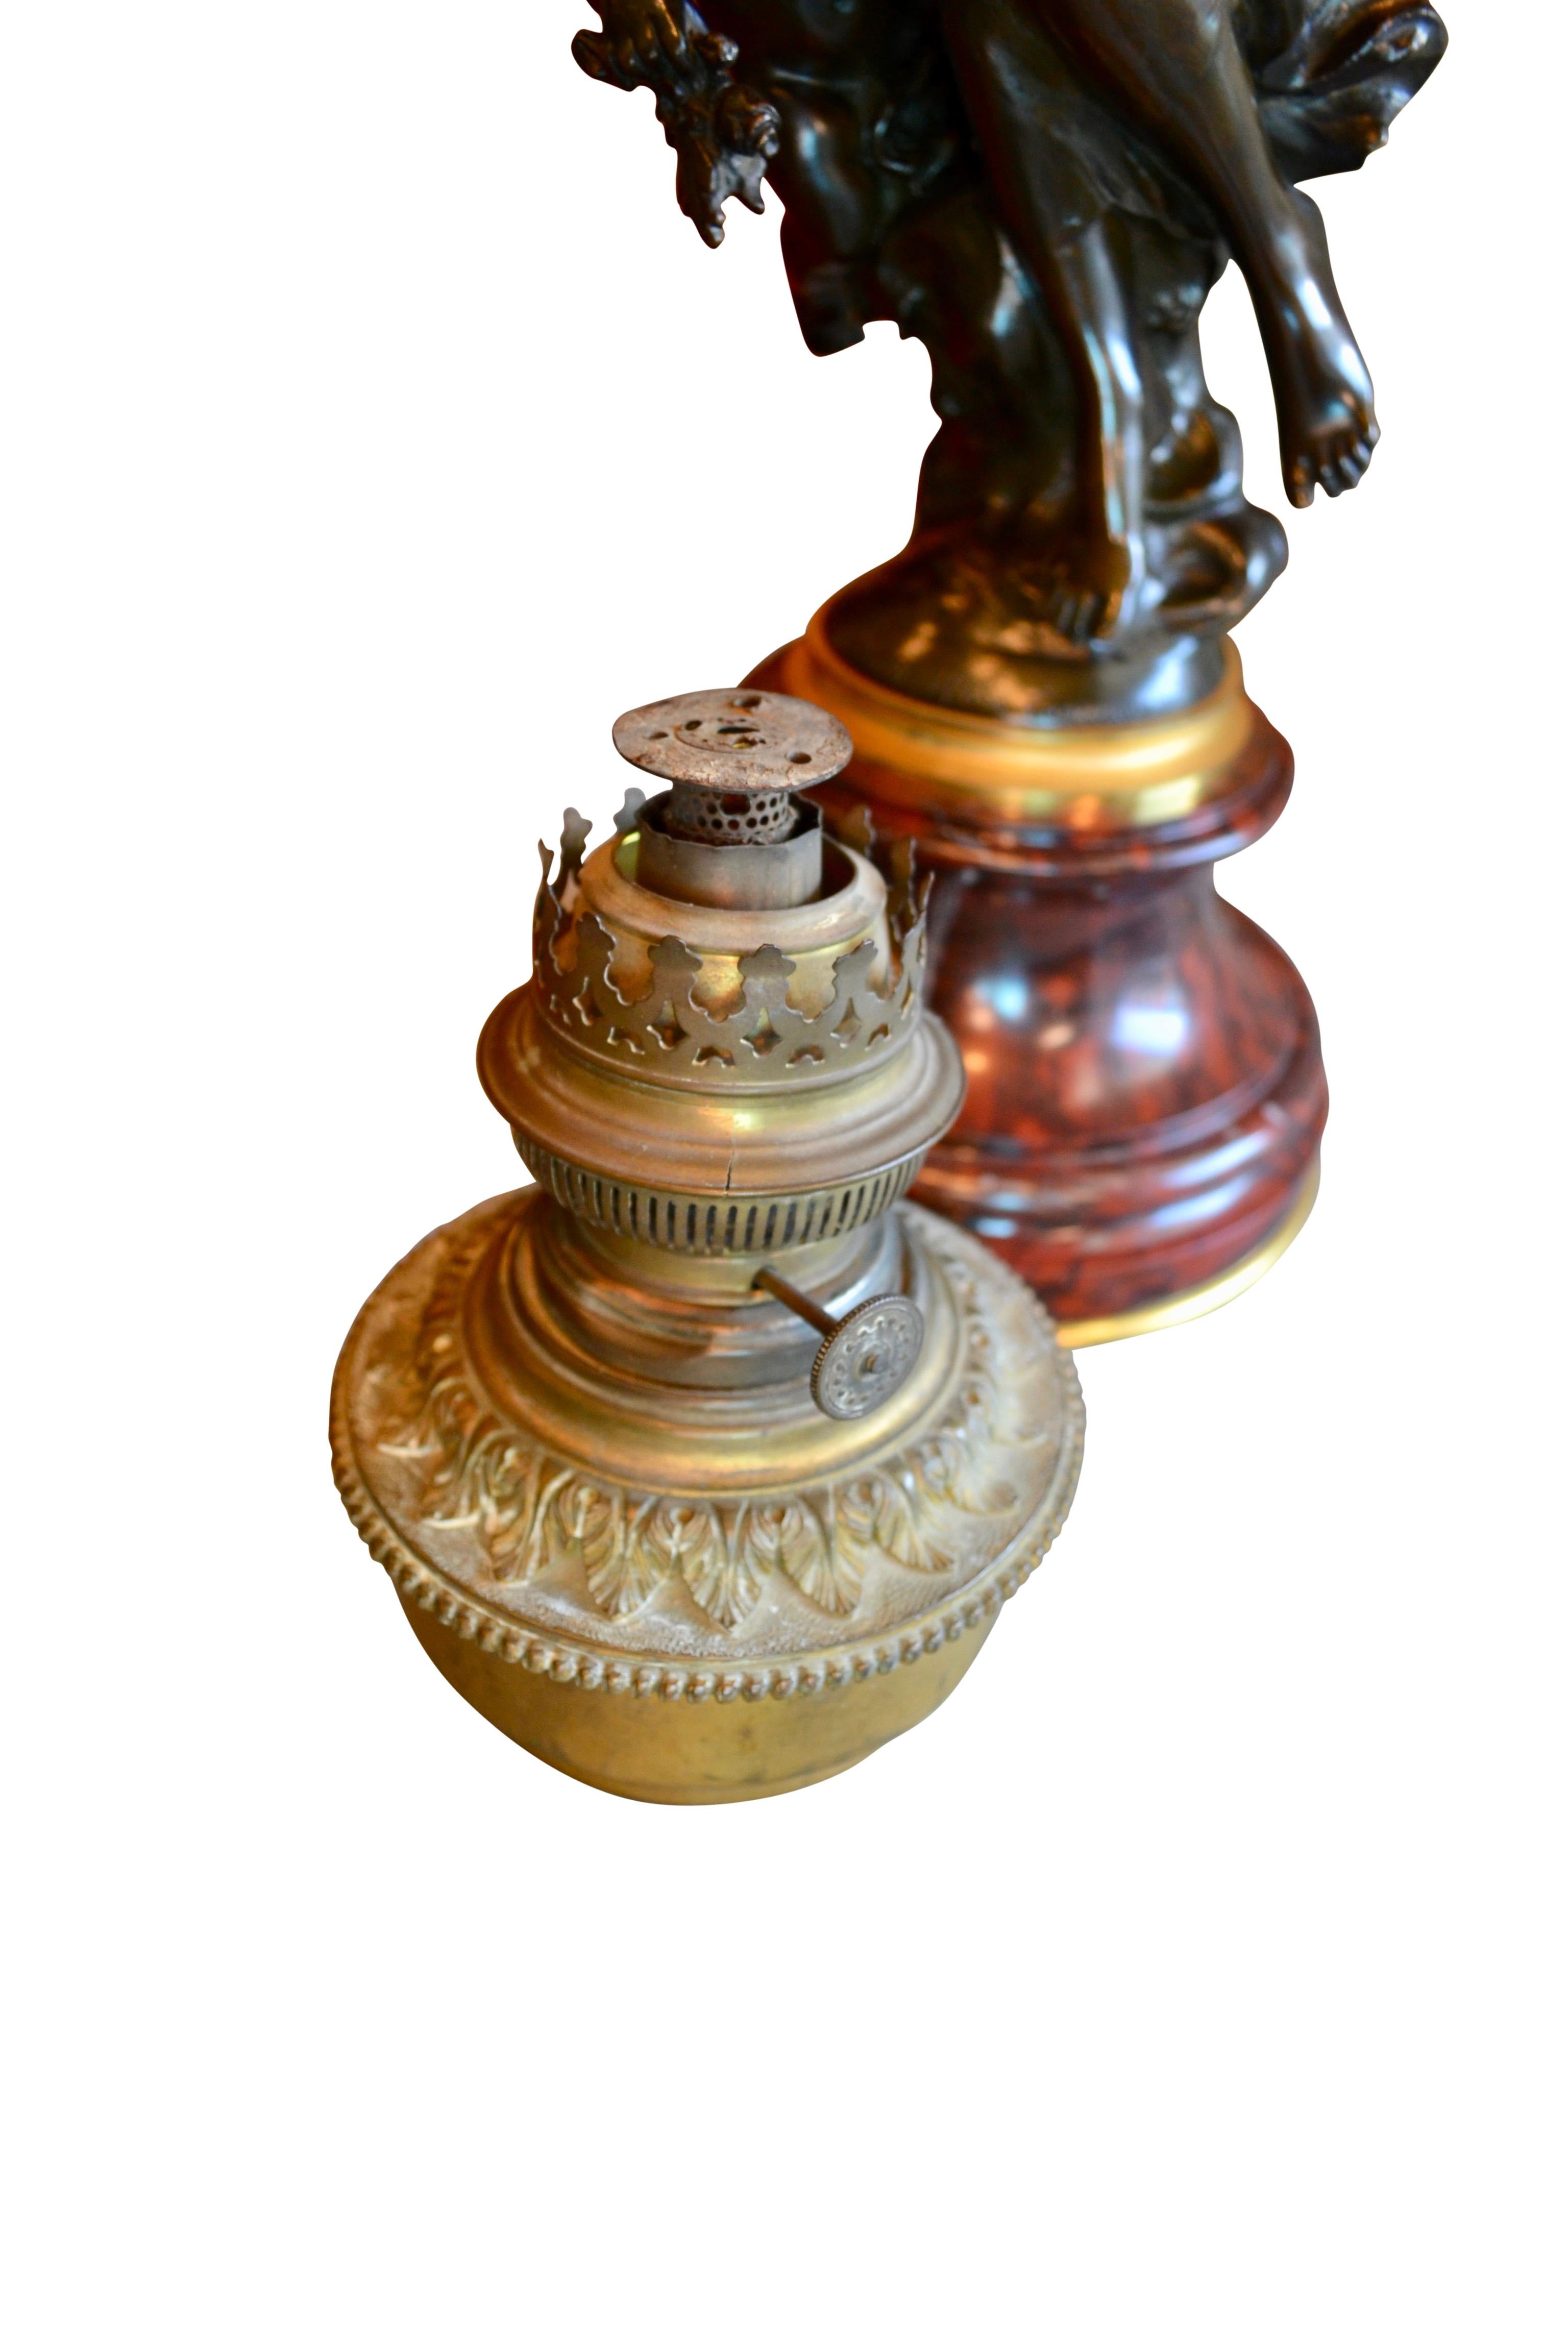  Oil Lamp Featuring a Mathurin Moreau Bronze Statue of  a Nymph and Putto   For Sale 1